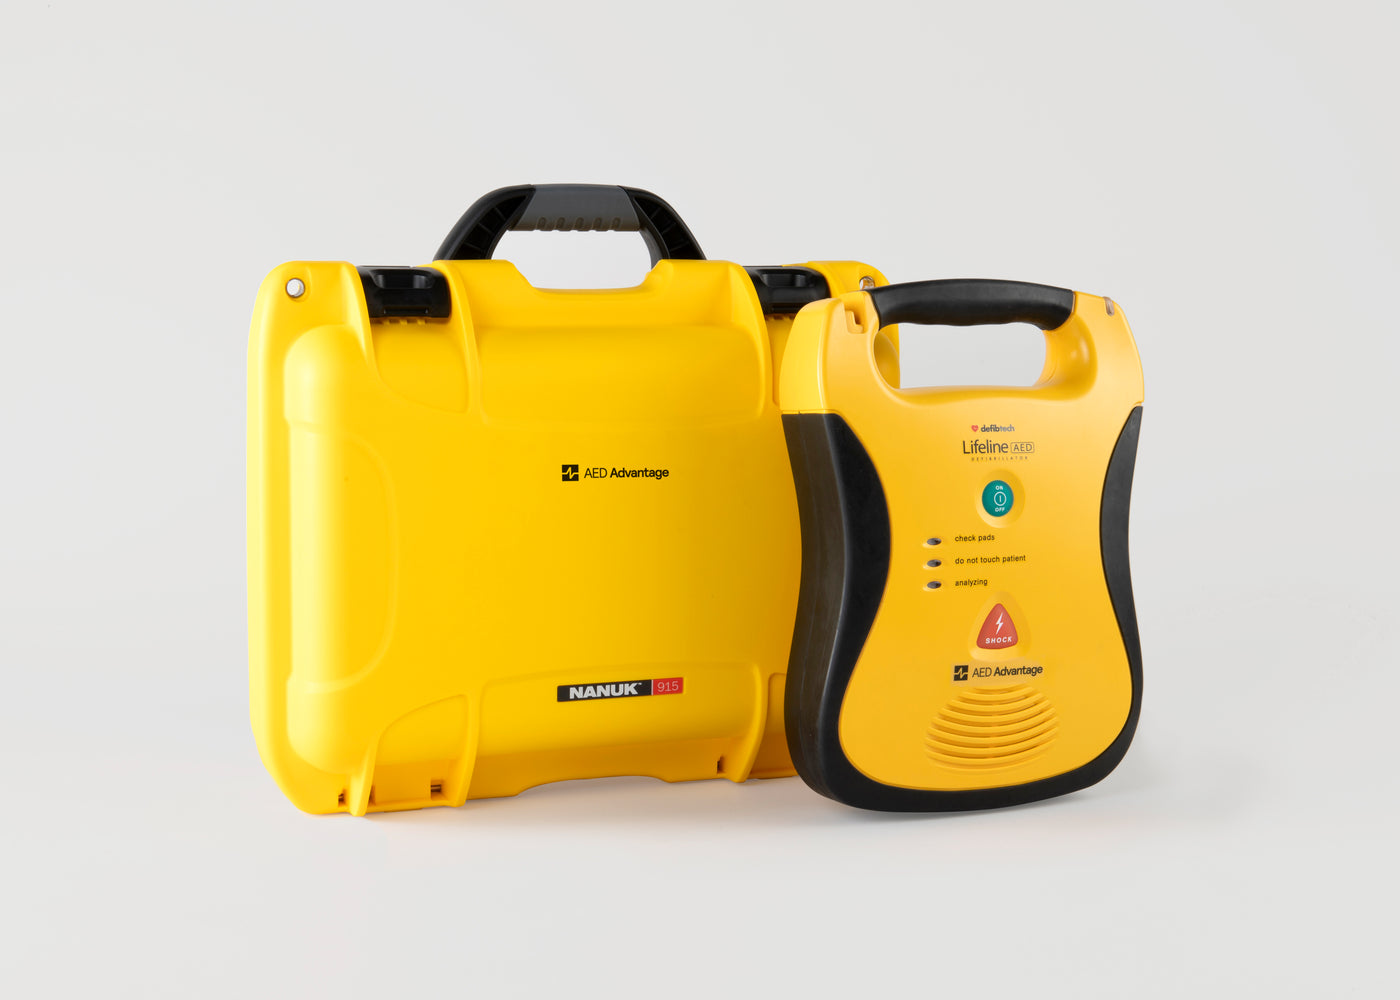 A yellow and black Defibtech Lifeline AED with a bright yellow hardshell carry case